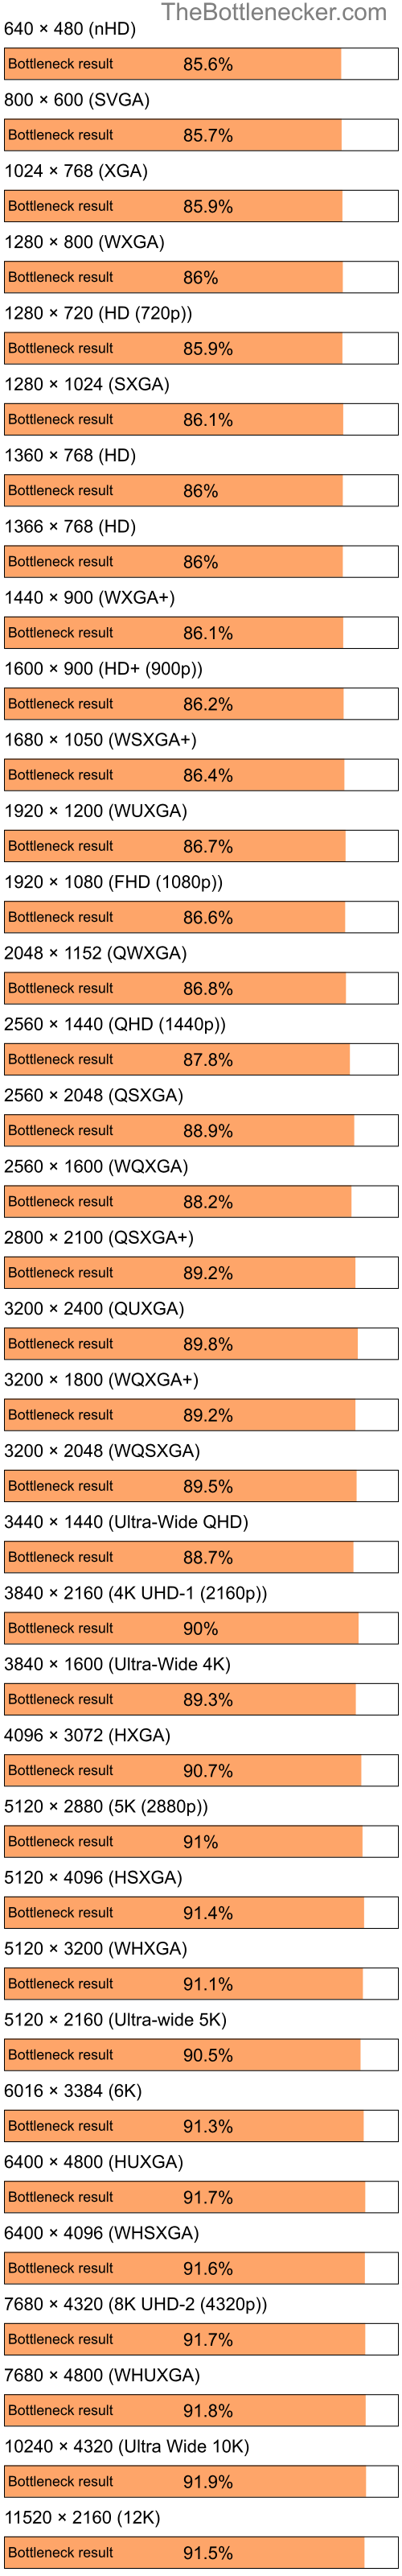 Bottleneck results by resolution for Intel Celeron and NVIDIA GeForce Go 6100 in Graphic Card Intense Tasks